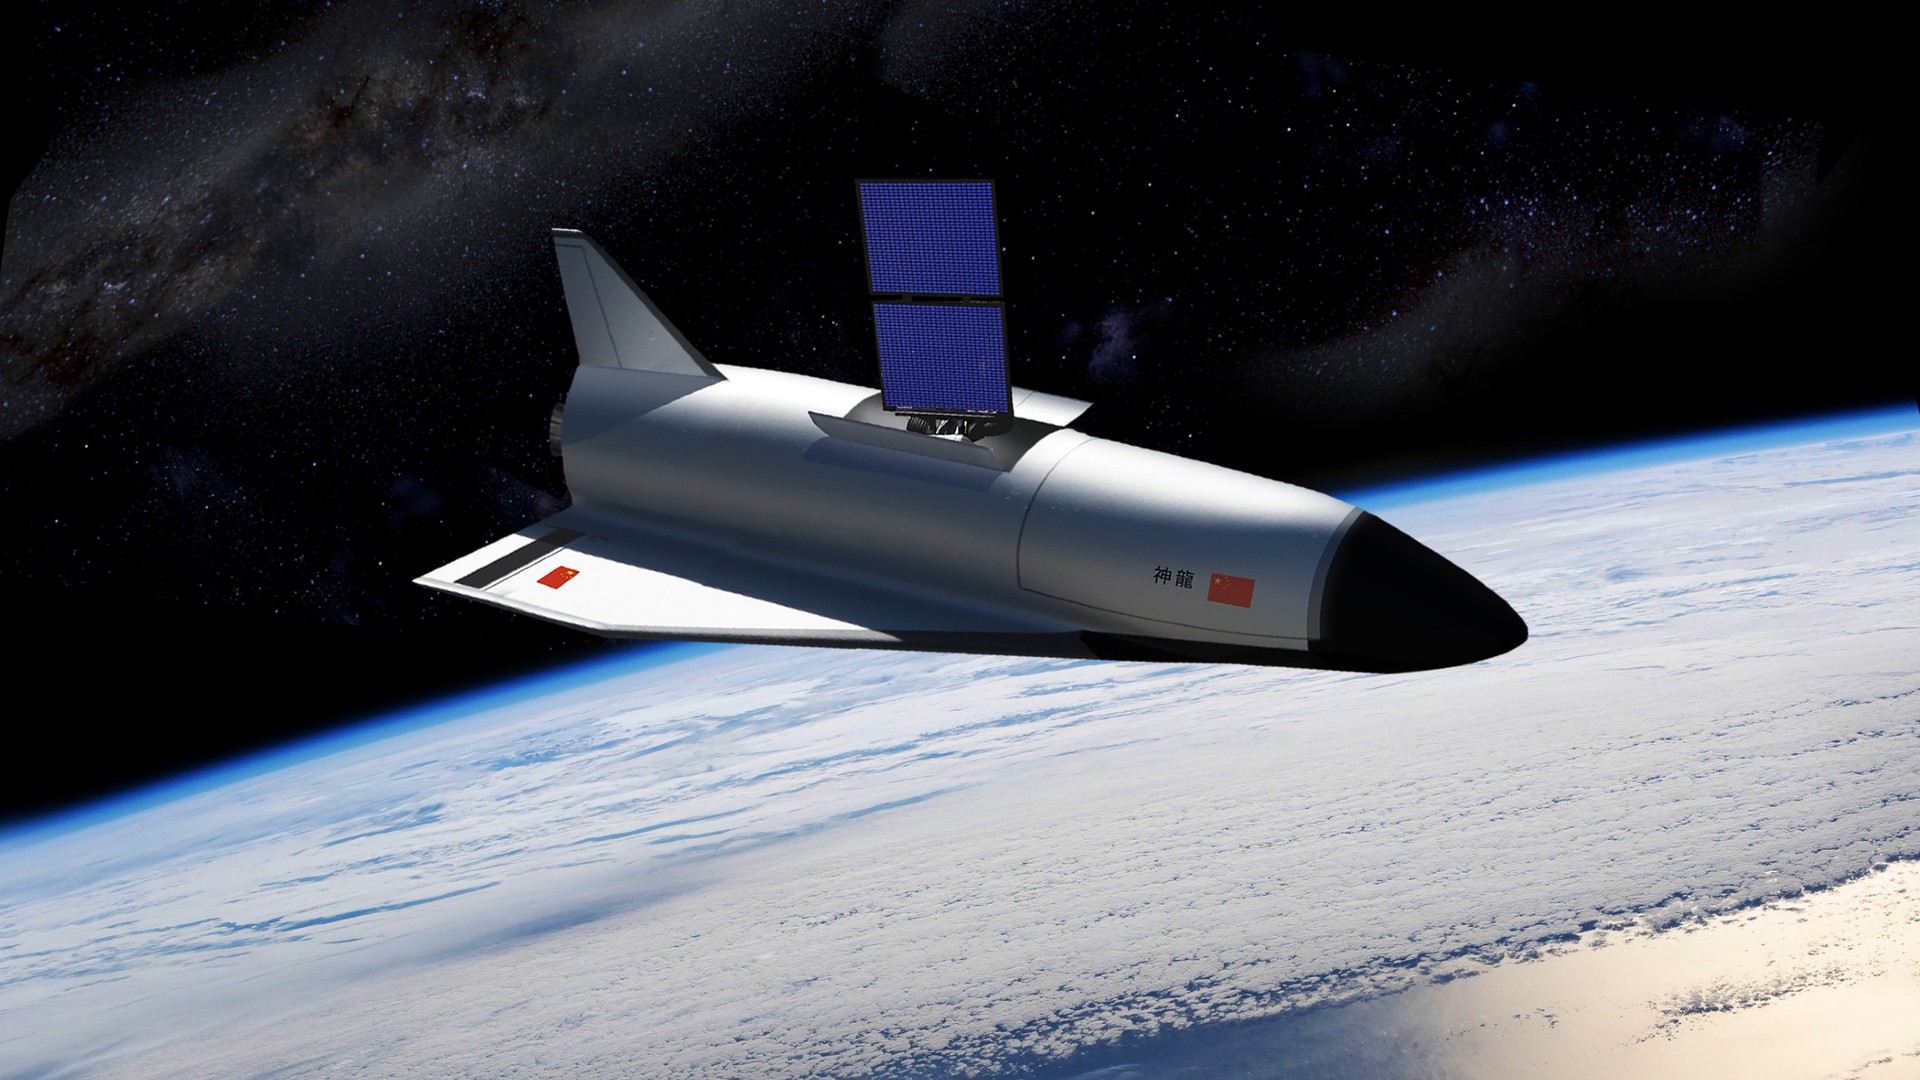 Secret maneuvers in orbit: Chinese spaceplane puts an unknown object